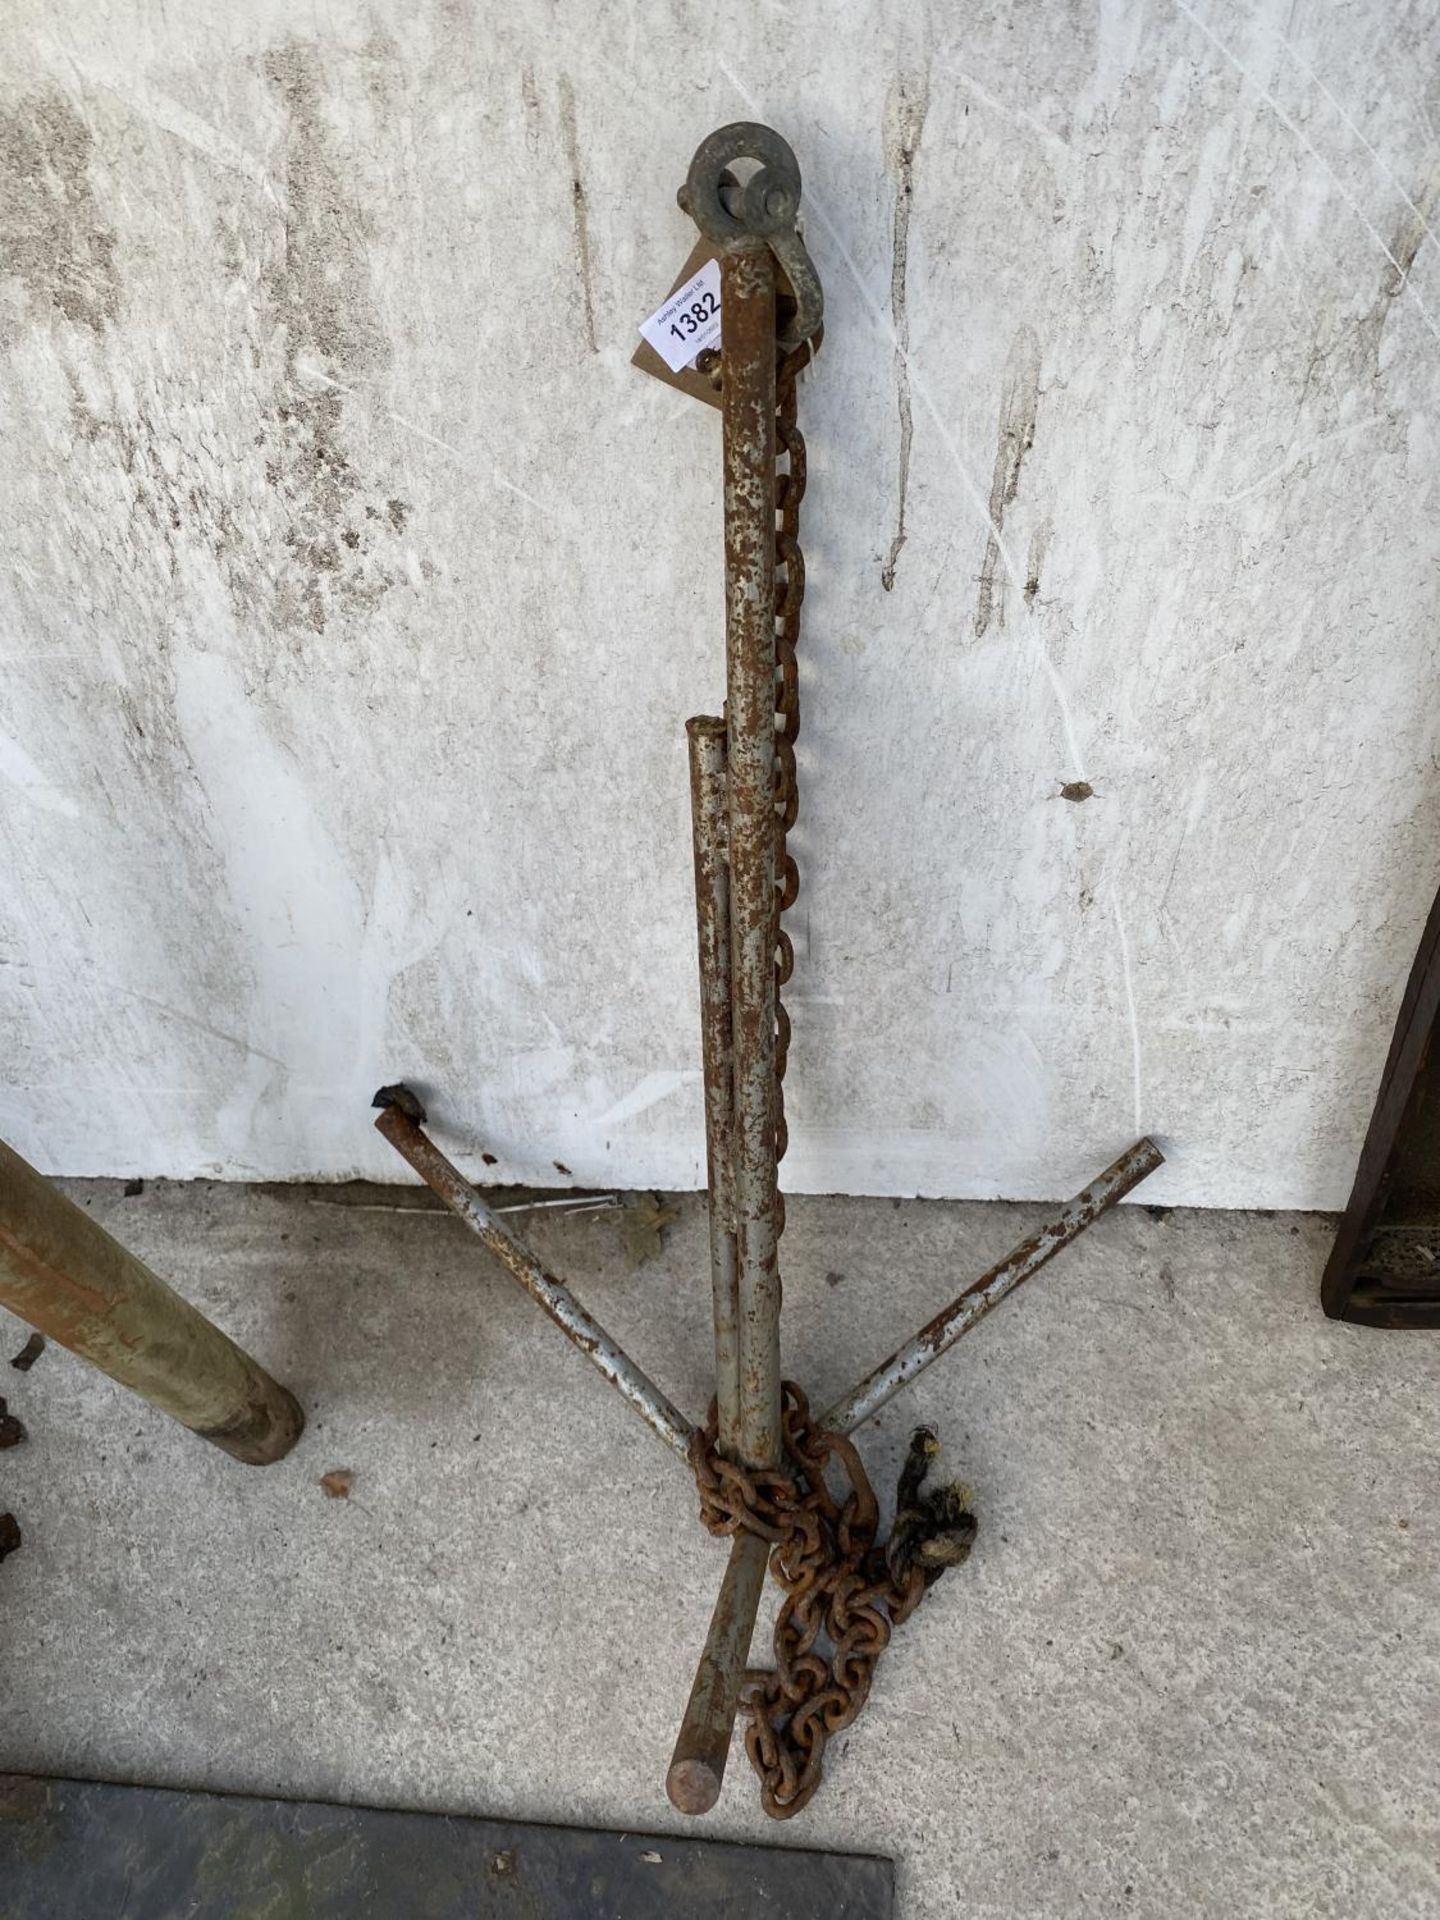 A METAL BOAT ANCHOR WITH CHAIN